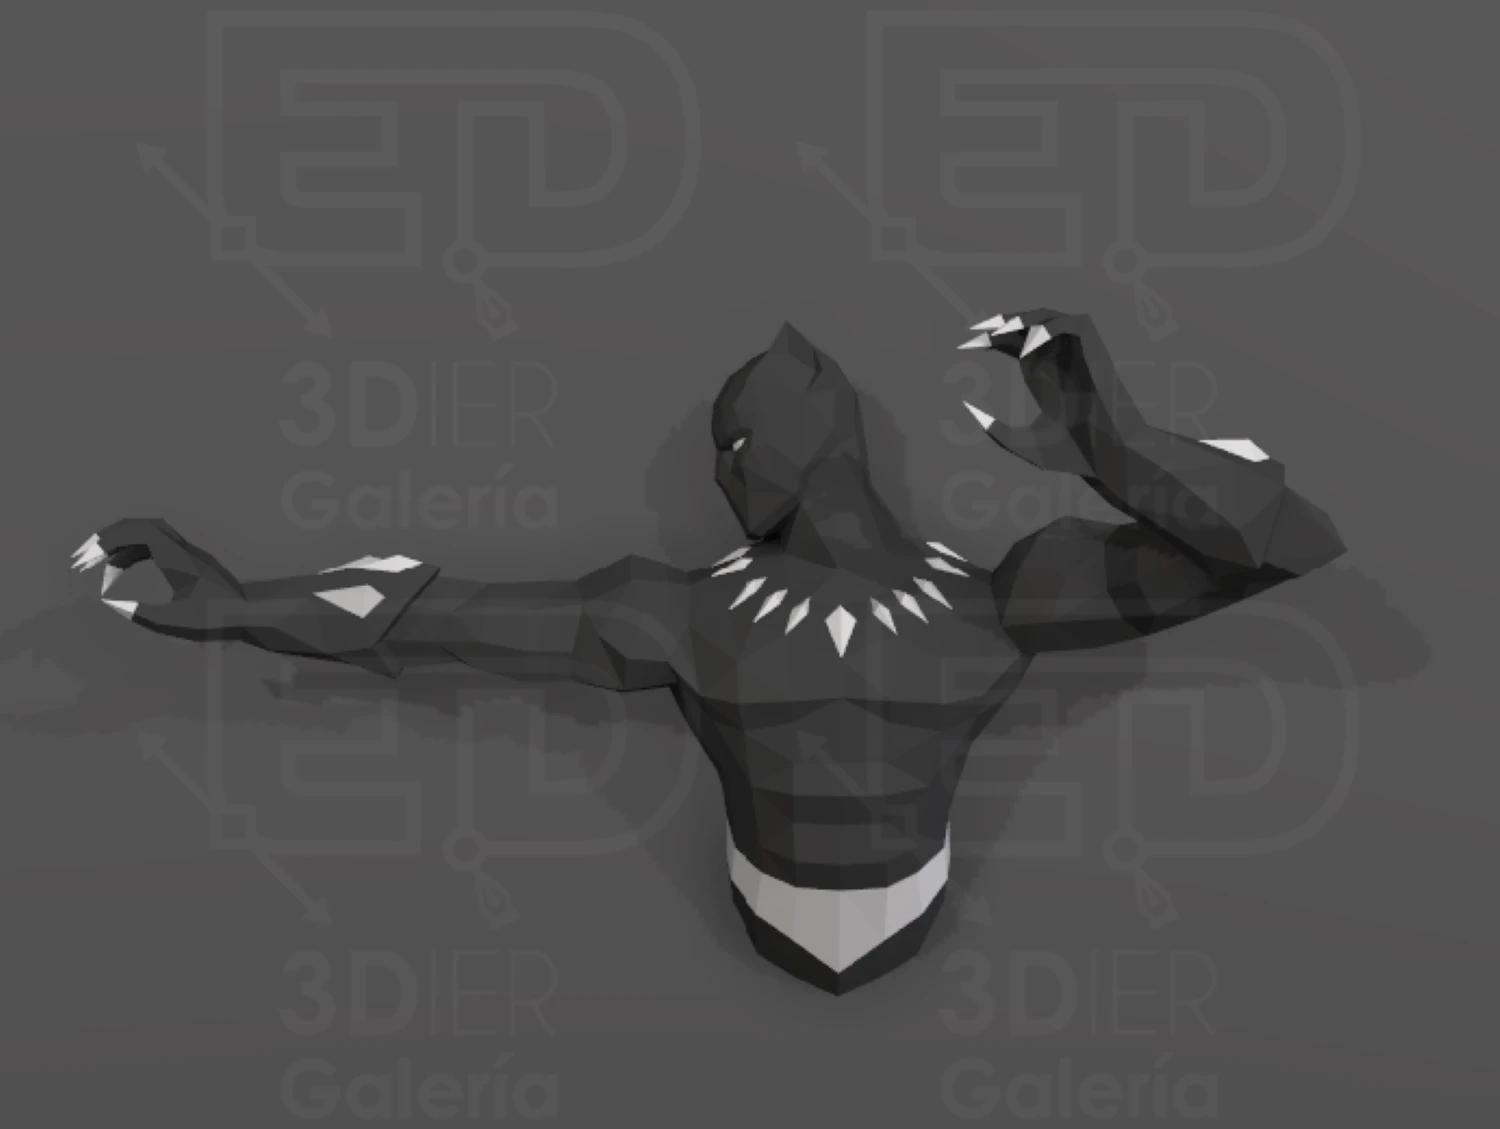 Black Panther Papercraft, PDF Templates, Paper Art, 3D Design for Crafts, Home Decor, Do It Yourself, 3DIER, PDF Patterns, Papercraft Templates, Low Poly